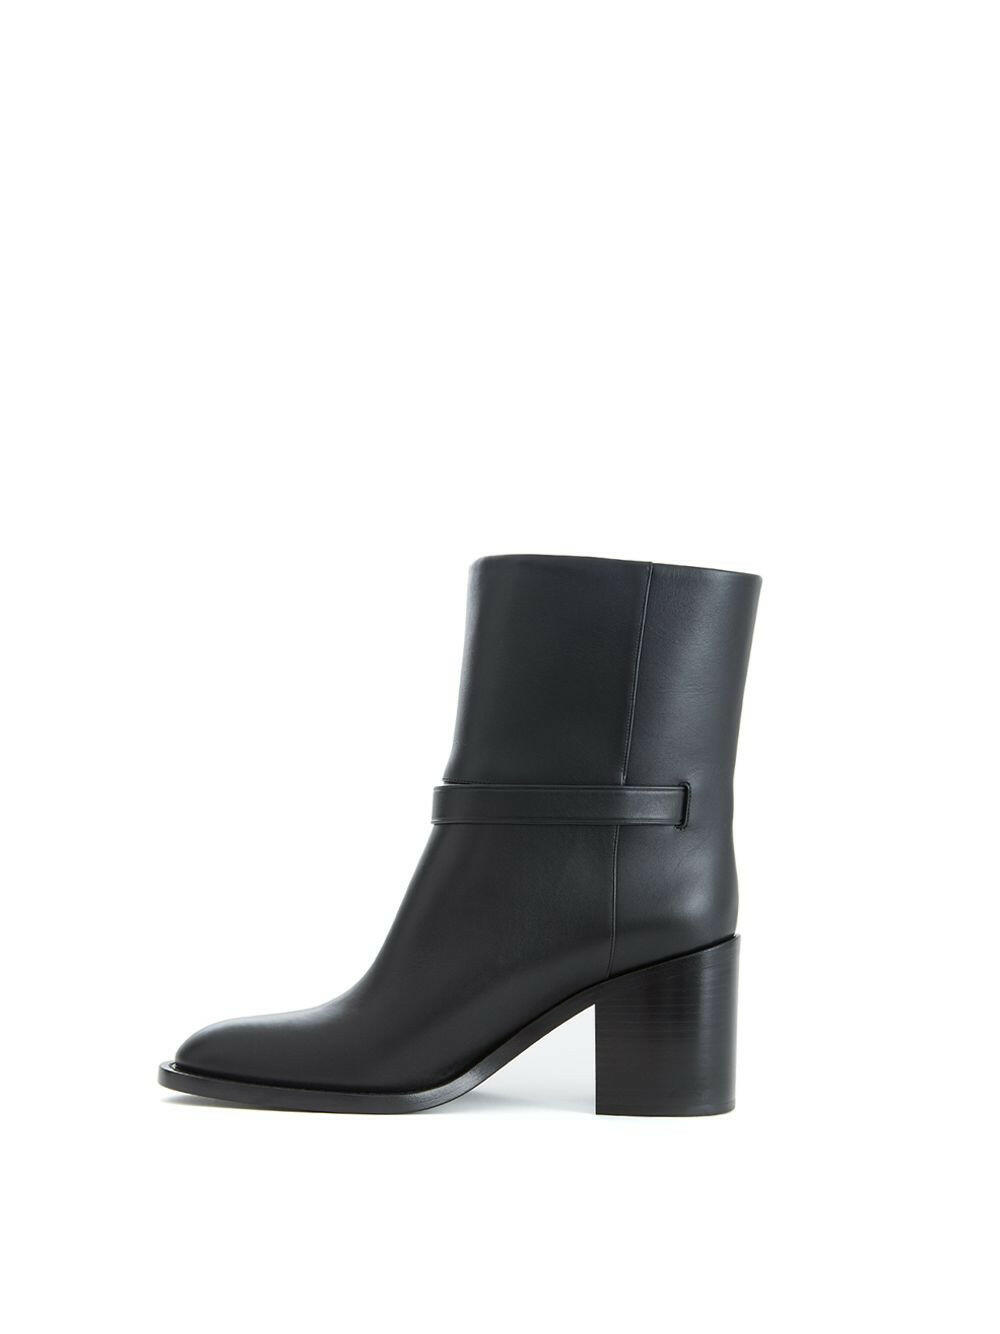 Burberry Black Leather Ankle Boots - GENUINE AUTHENTIC BRAND LLC  